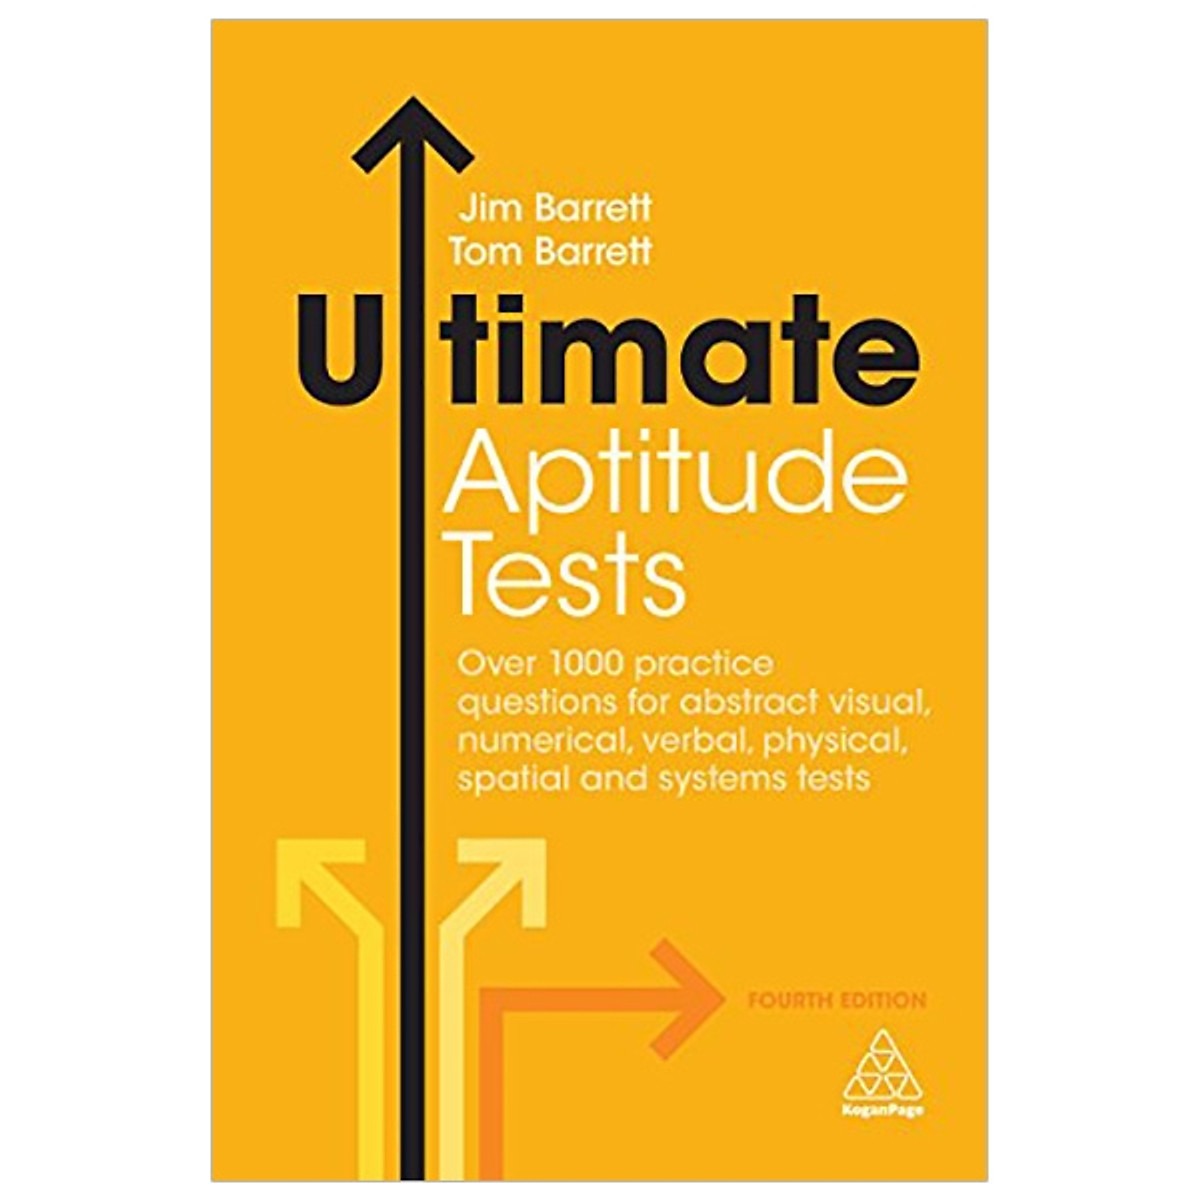 Ultimate Aptitude Tests: Over 1000 Practice Questions for Abstract Visual, Numerical, Verbal, Physical, Spatial and Systems Tests